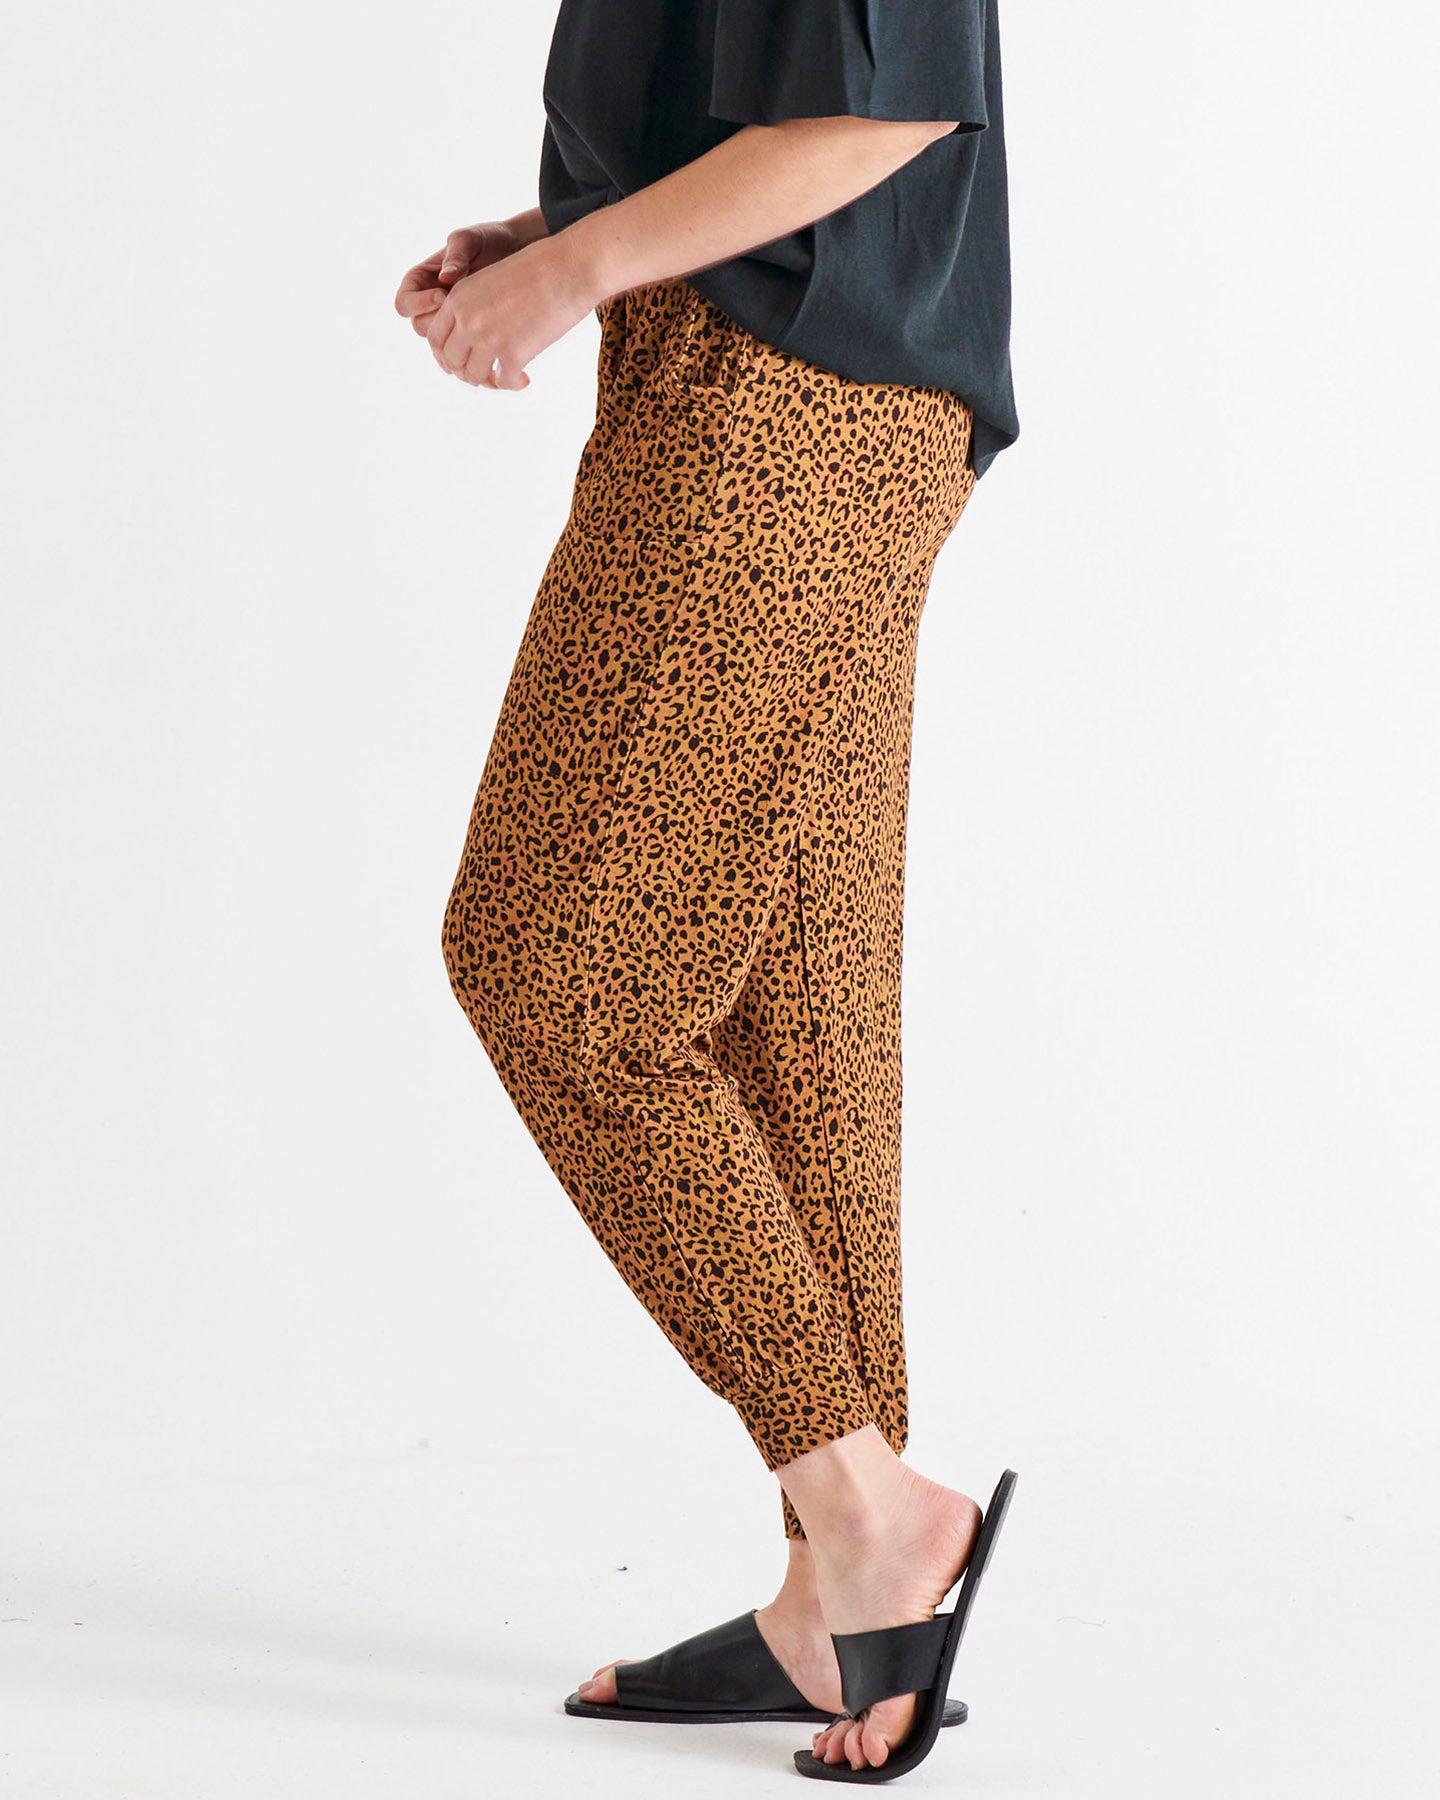 Paris Mid-Rise Stretchy Loose Fitting Jogger Pant - Wild Leopard Print